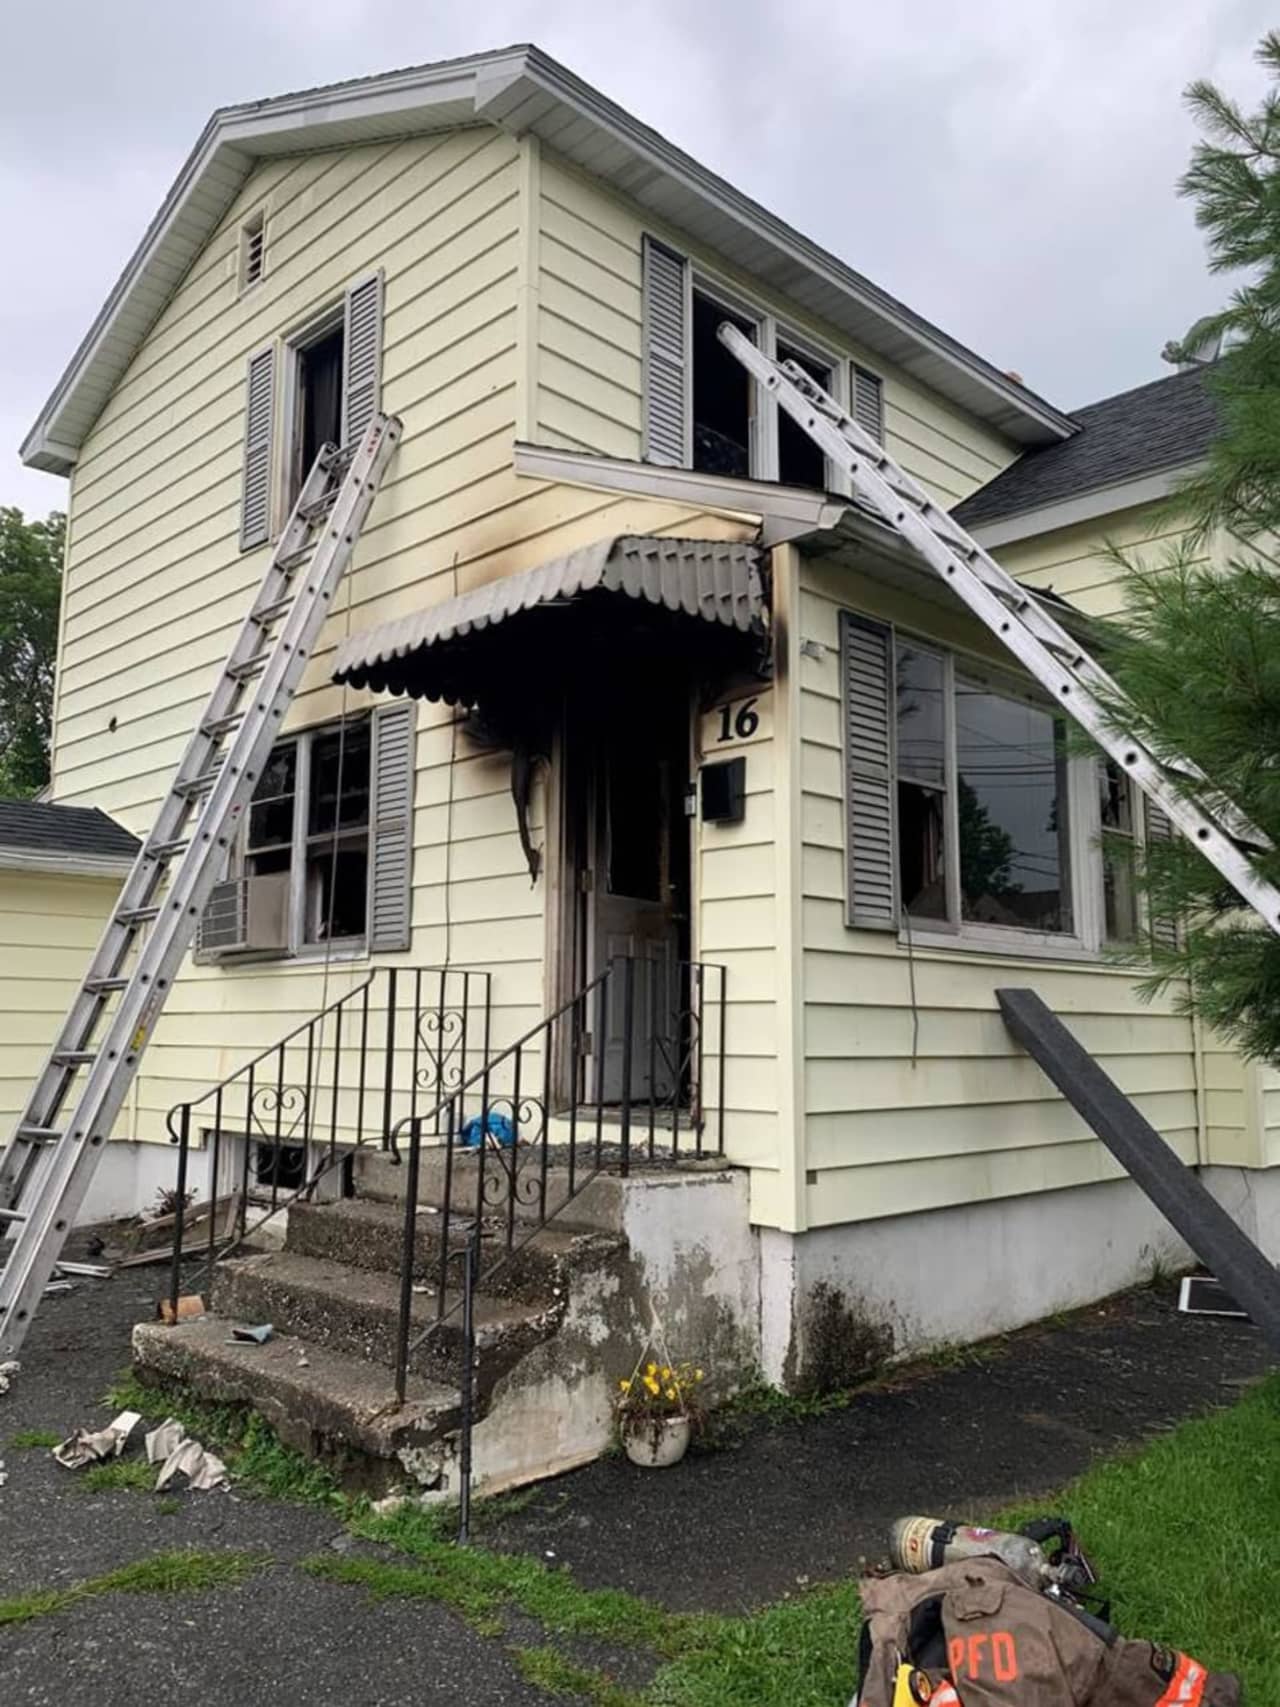 A family dog died during a house fire in Pittsfield.